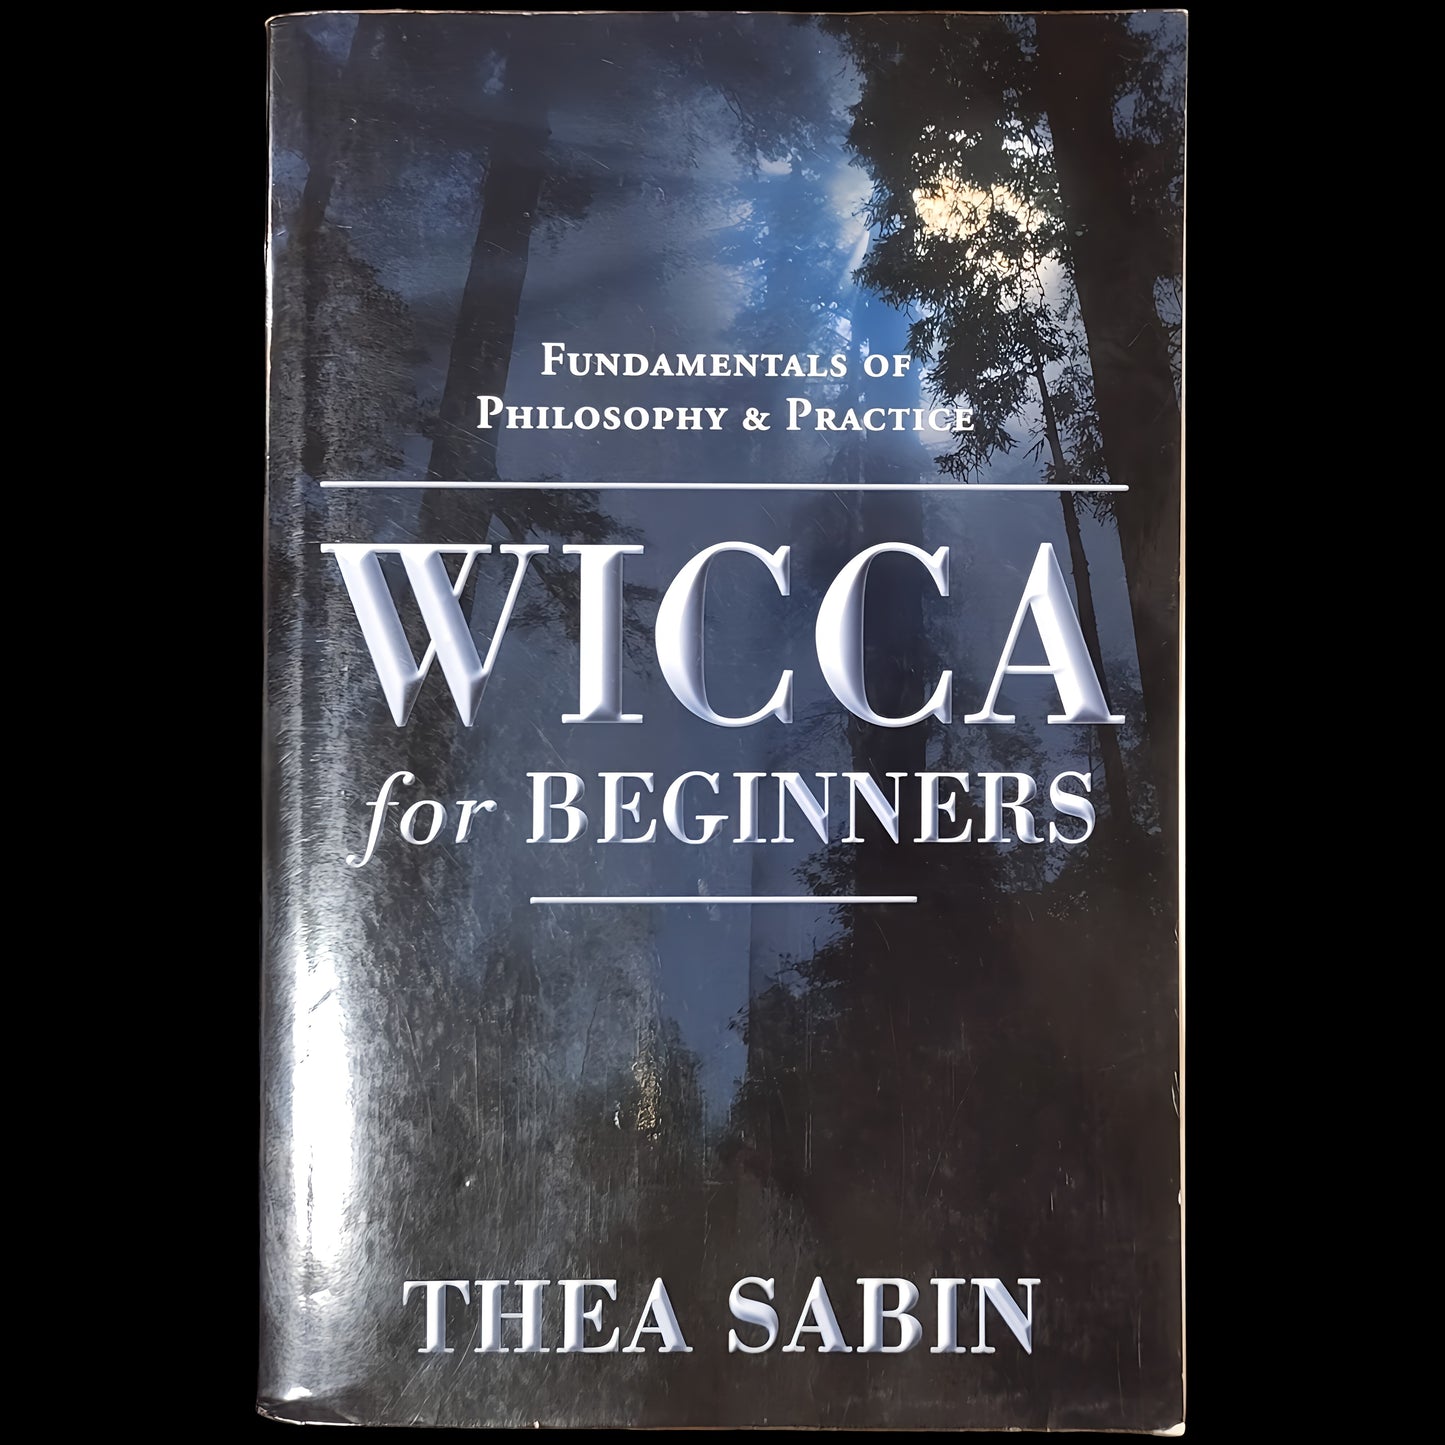 (Pre-Loved) Wicca For Beginners: Fundamentals of Philosophy & Practice by Thea Sabin